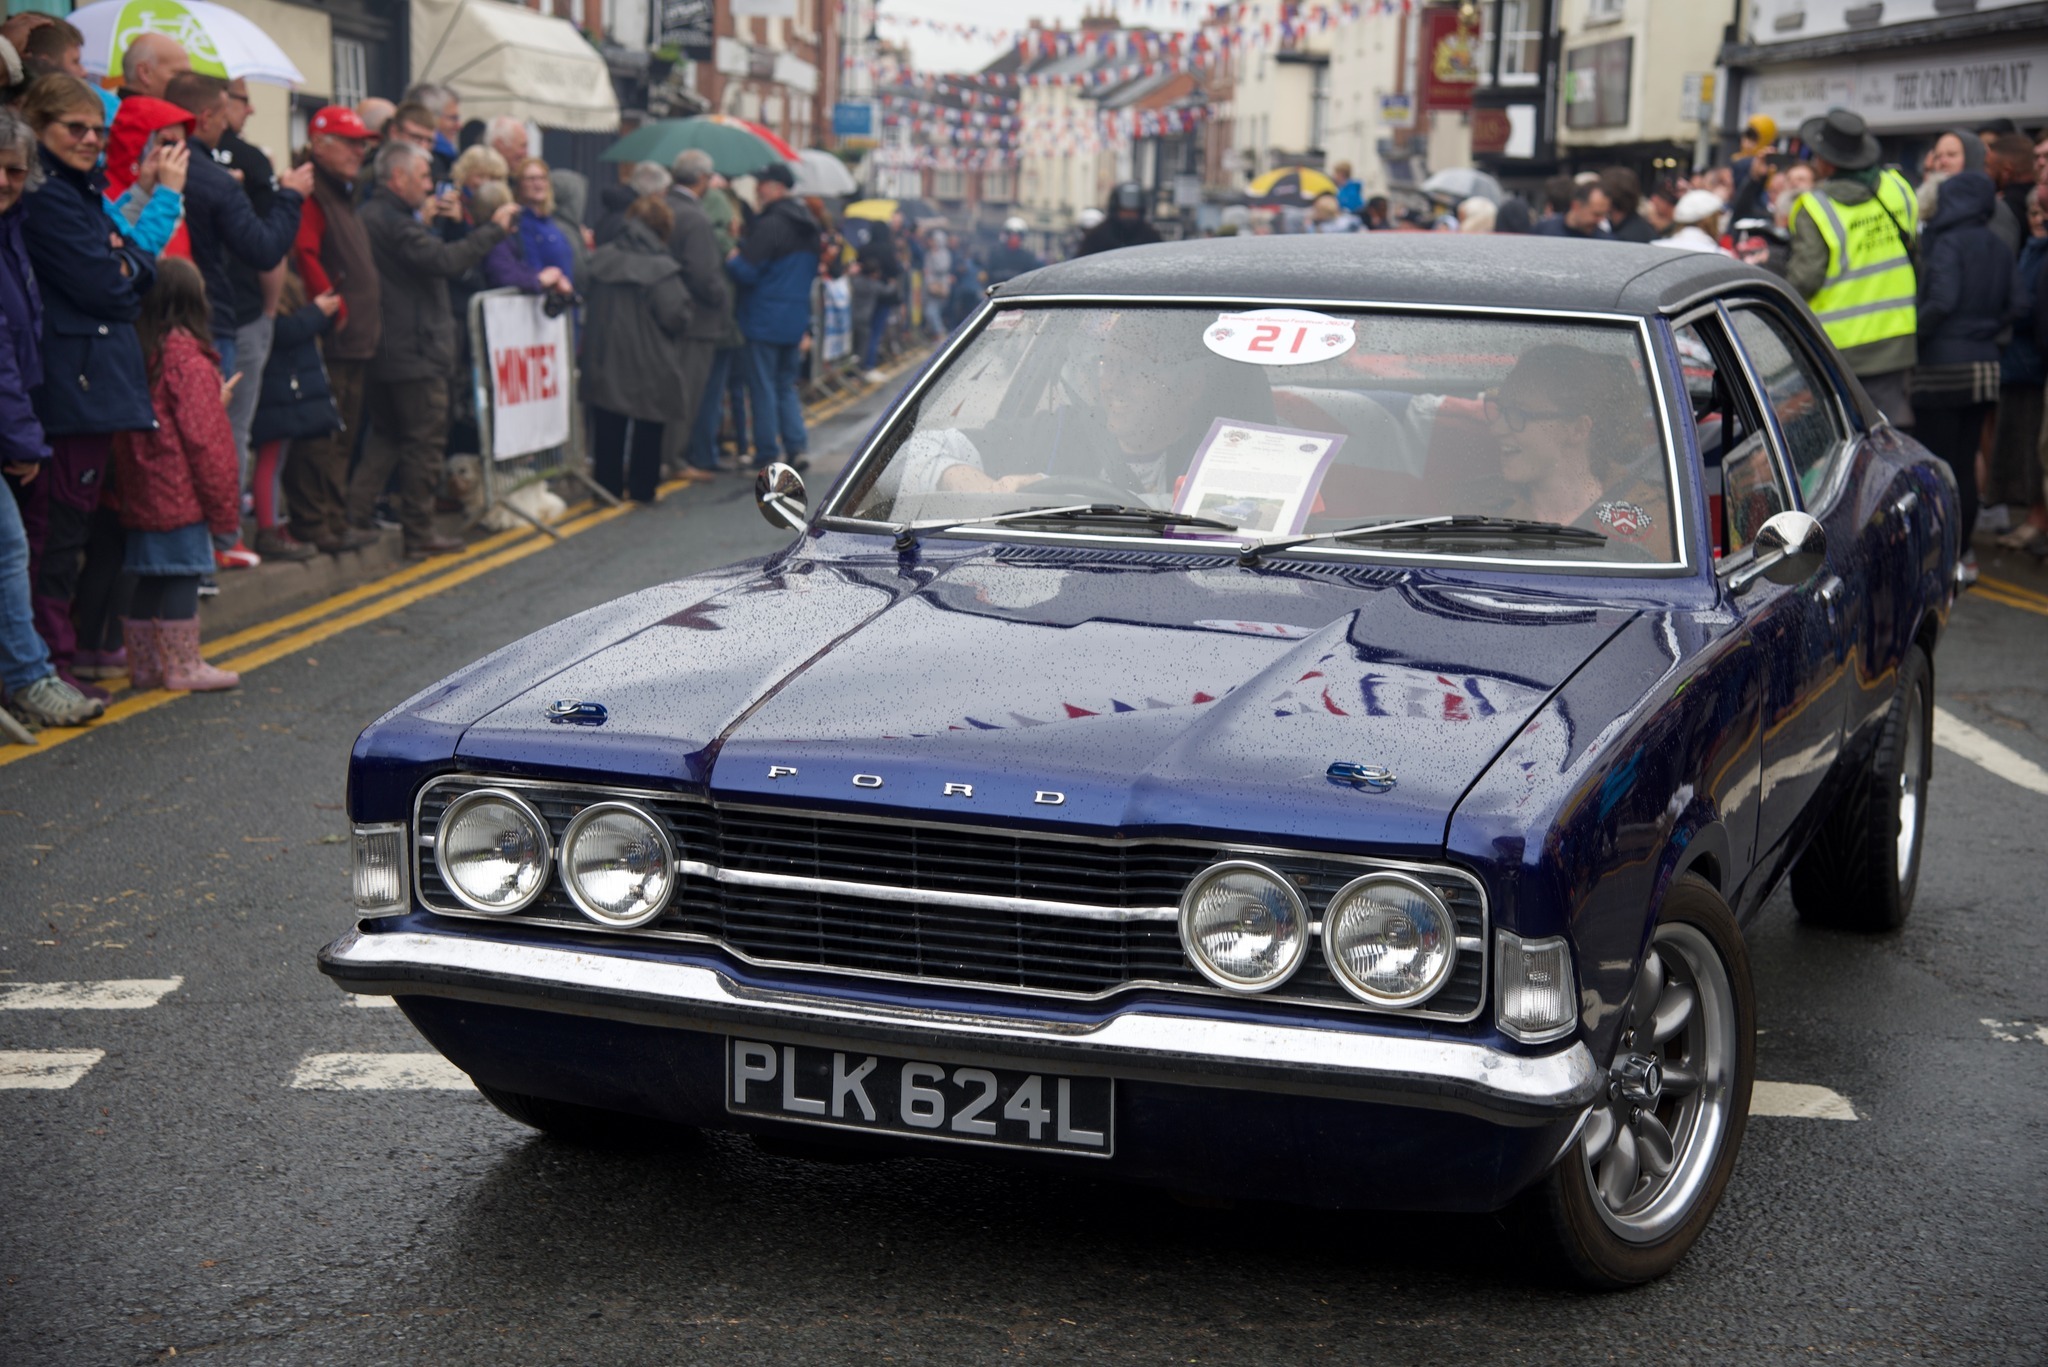 Bromyard Speed Festival 2022: A 1970s Ford Cortina. Picture: Jane Hufton